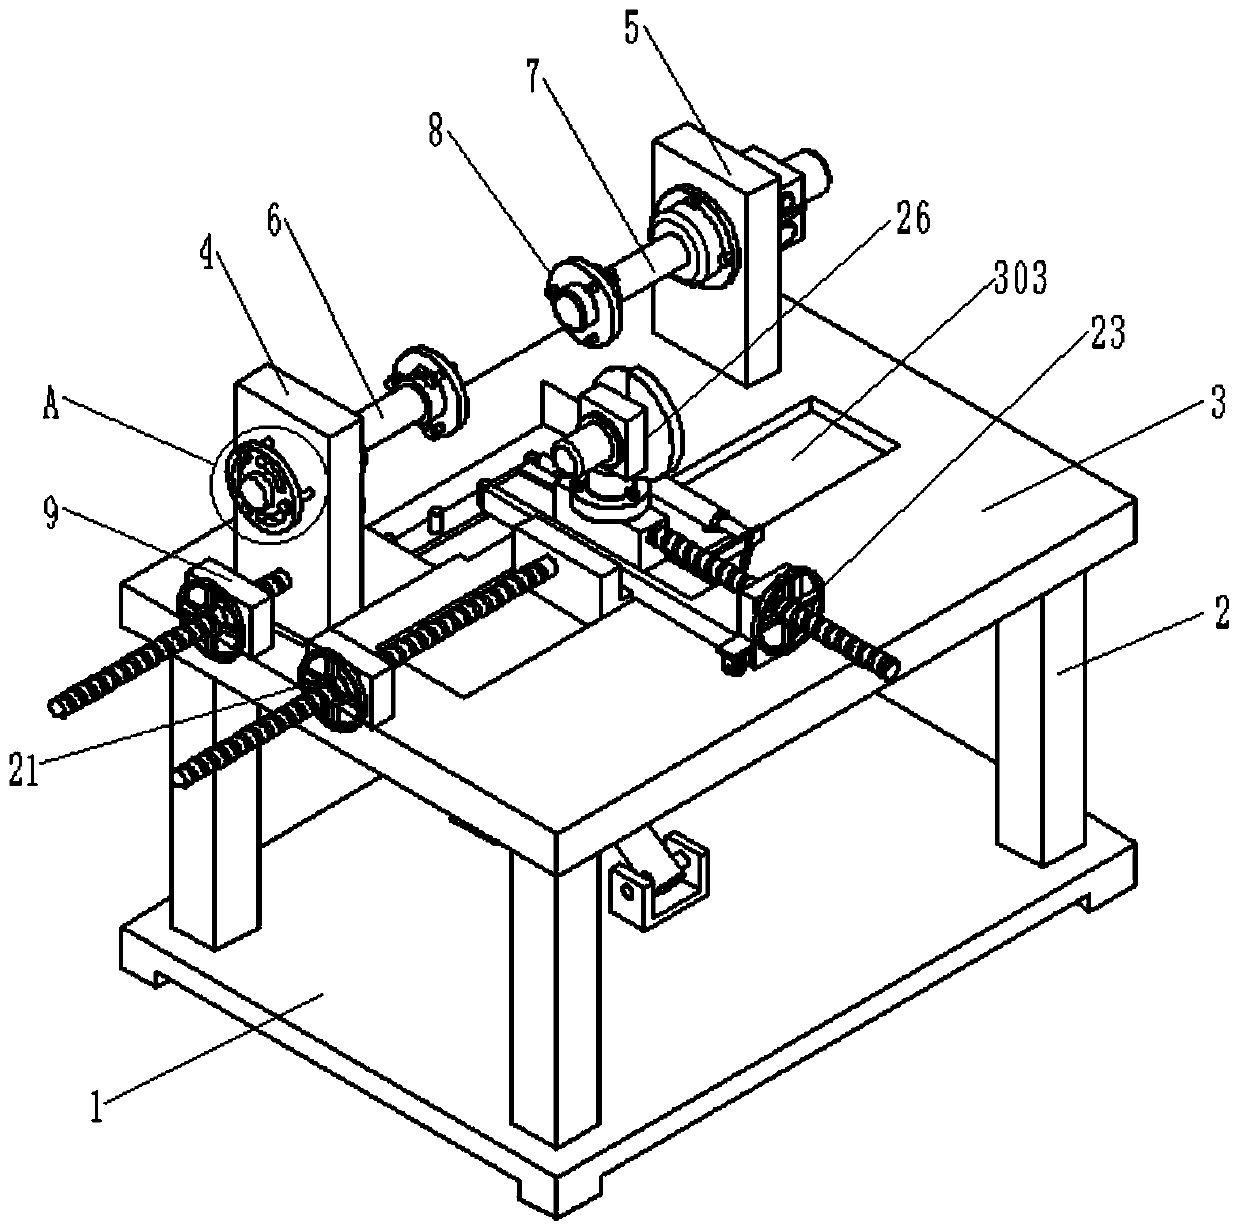 Gear cutter hob sharpening machine with adjustable sharpening angle